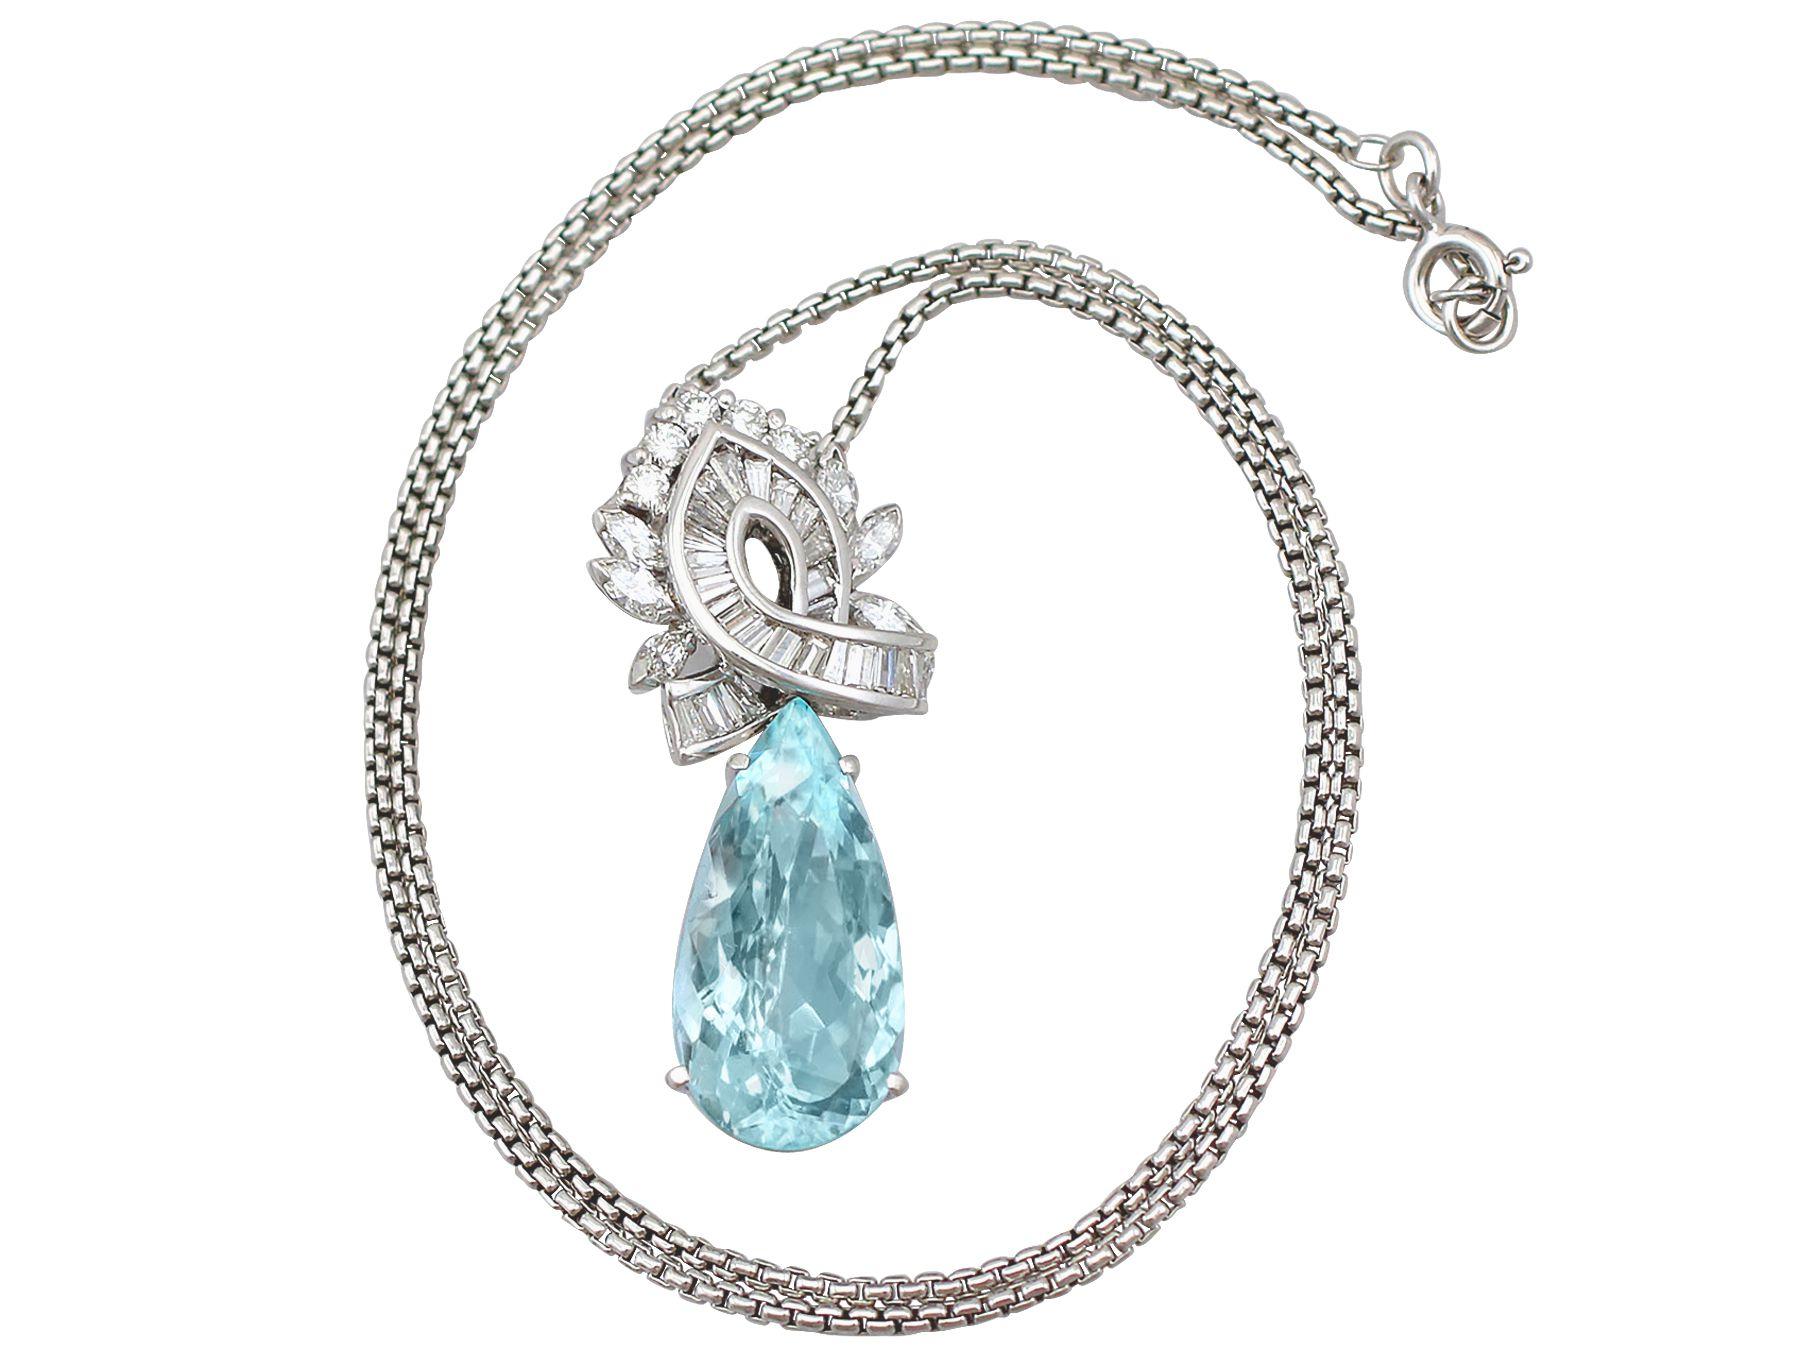 A stunning vintage 11.20 carat aquamarine and 2.37 carat diamond, 18 karat white gold and platinum pendant; part of our diverse diamond jewelry and estate jewelry collections.

This stunning, fine and impressive vintage aquamarine pendant has been